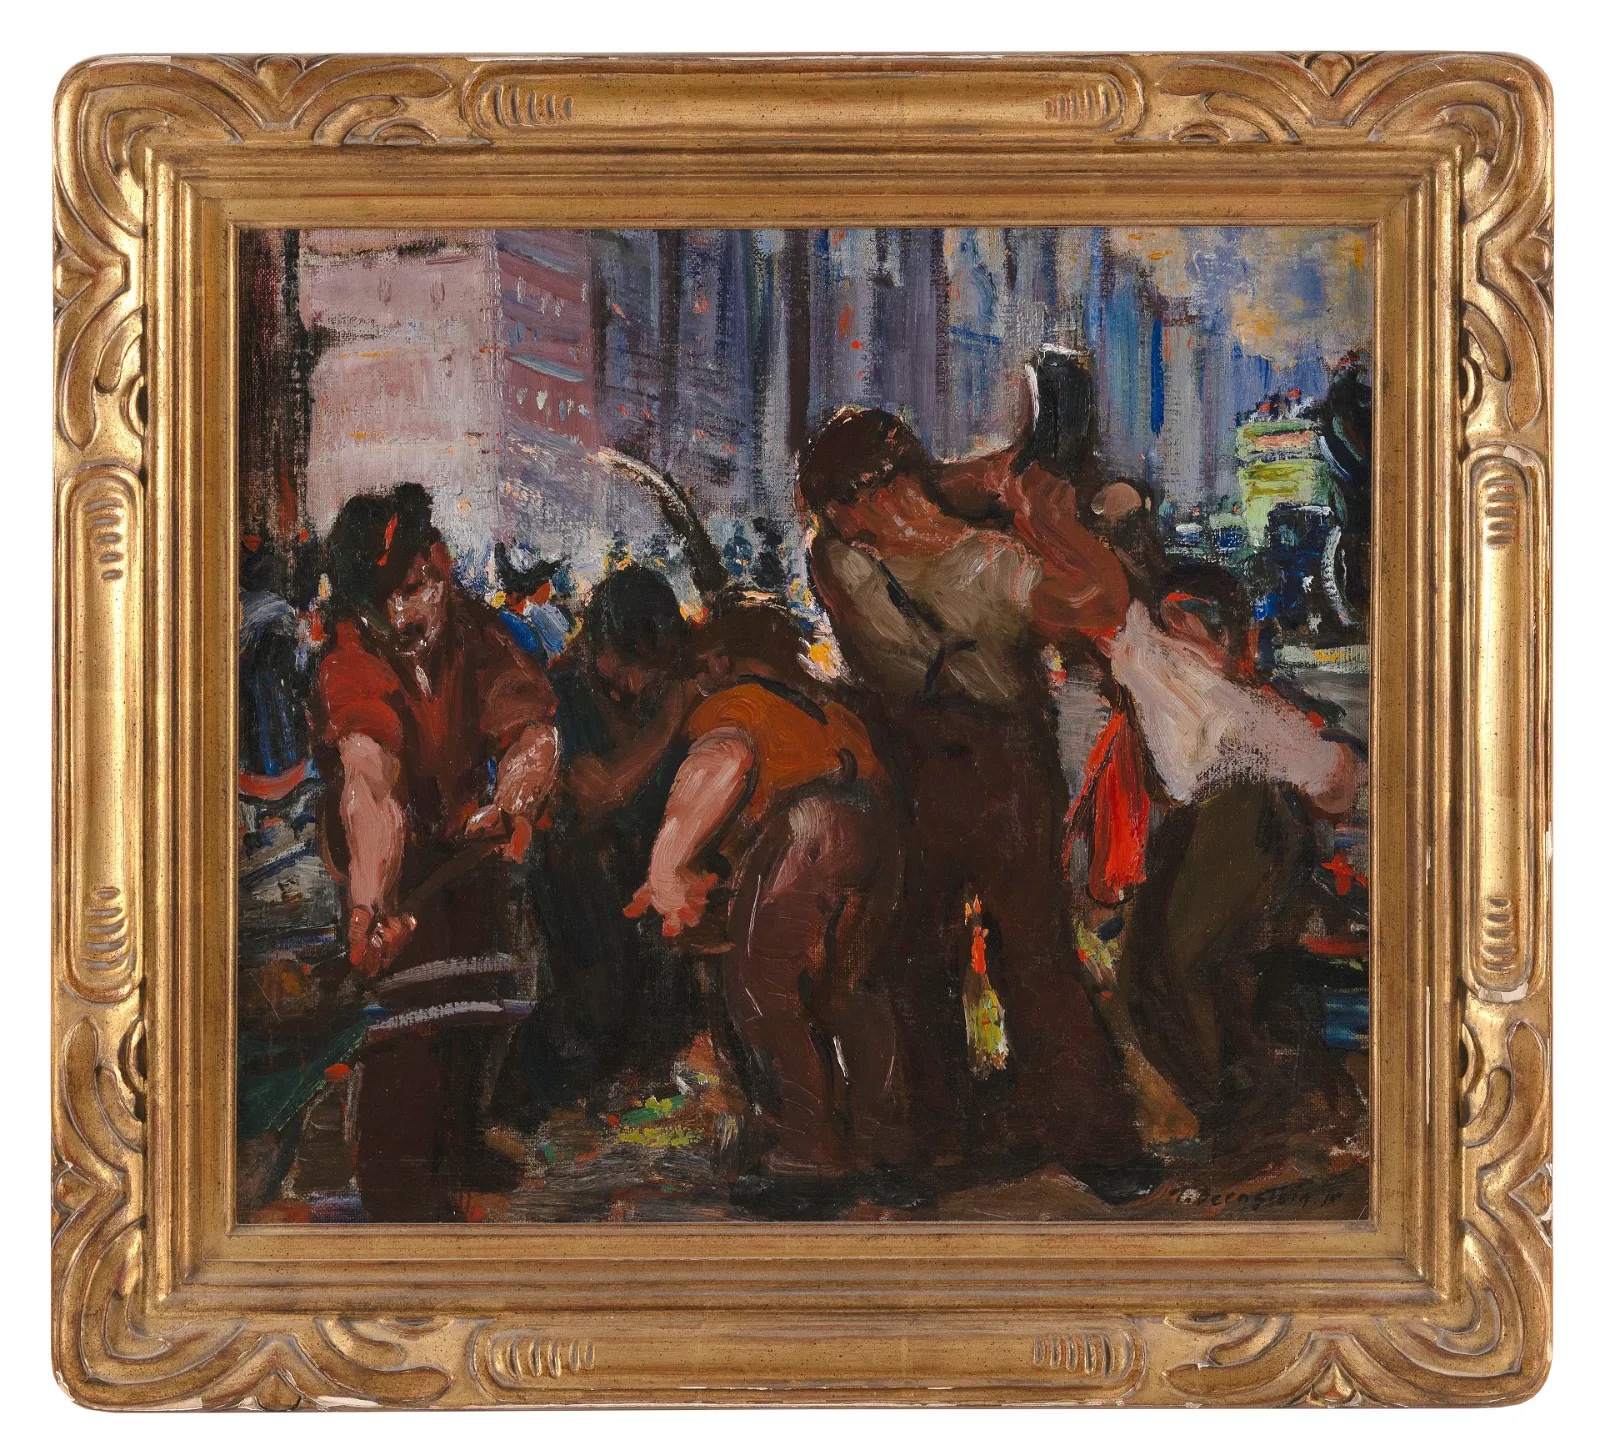 Theresa Ferber Bernstein, 'Streetworkers,' estimated at $5,000-$10,000 at Eldred's.